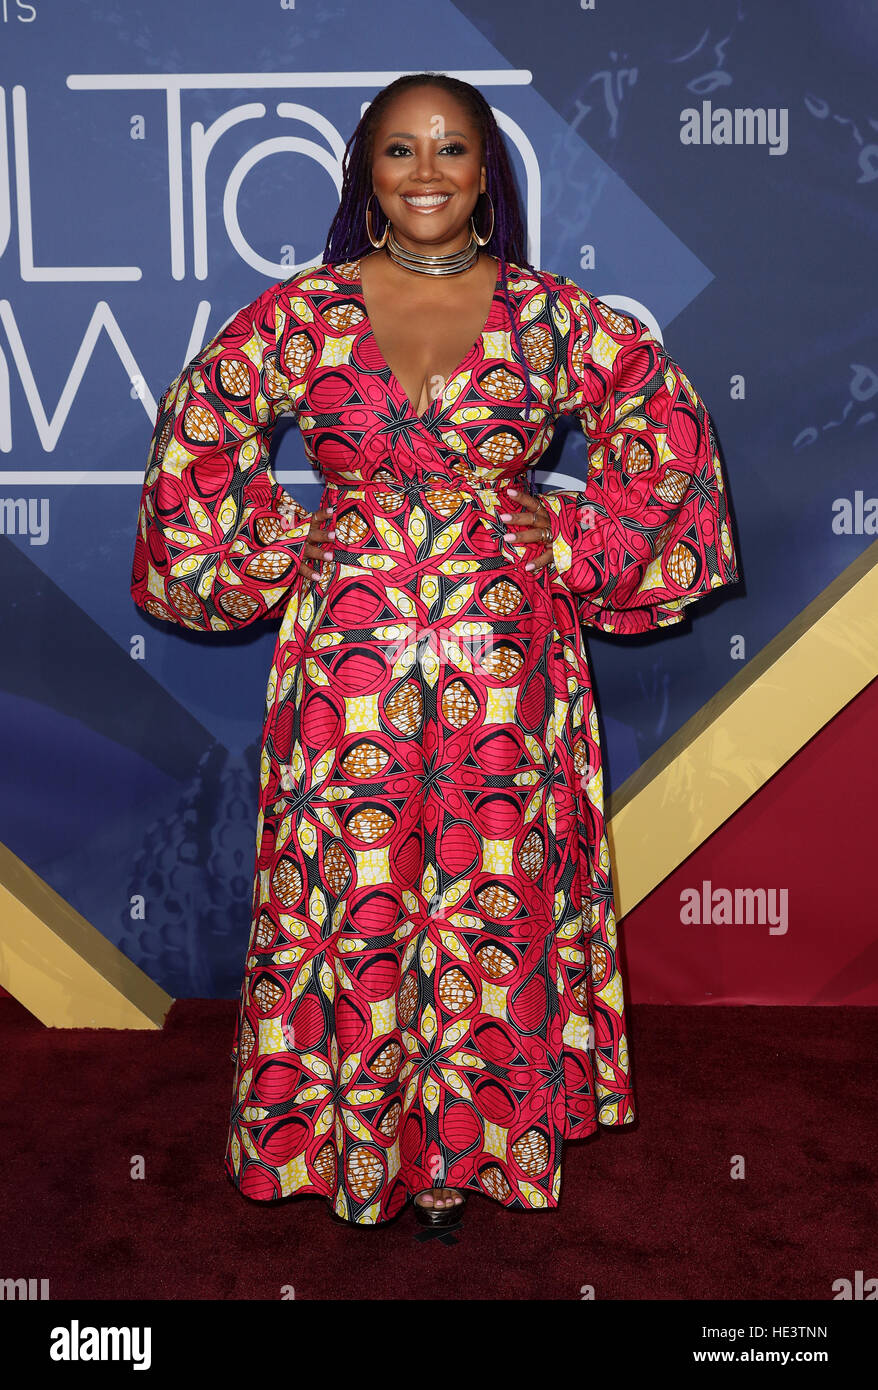 Soul Train Awards 2016 Red Carpet Arrivals at The Orleans Arena in Las Vegas  Featuring: Lalah Hathaway Where: Las Vegas, Nevada, United States When: 07 Nov 2016 Stock Photo